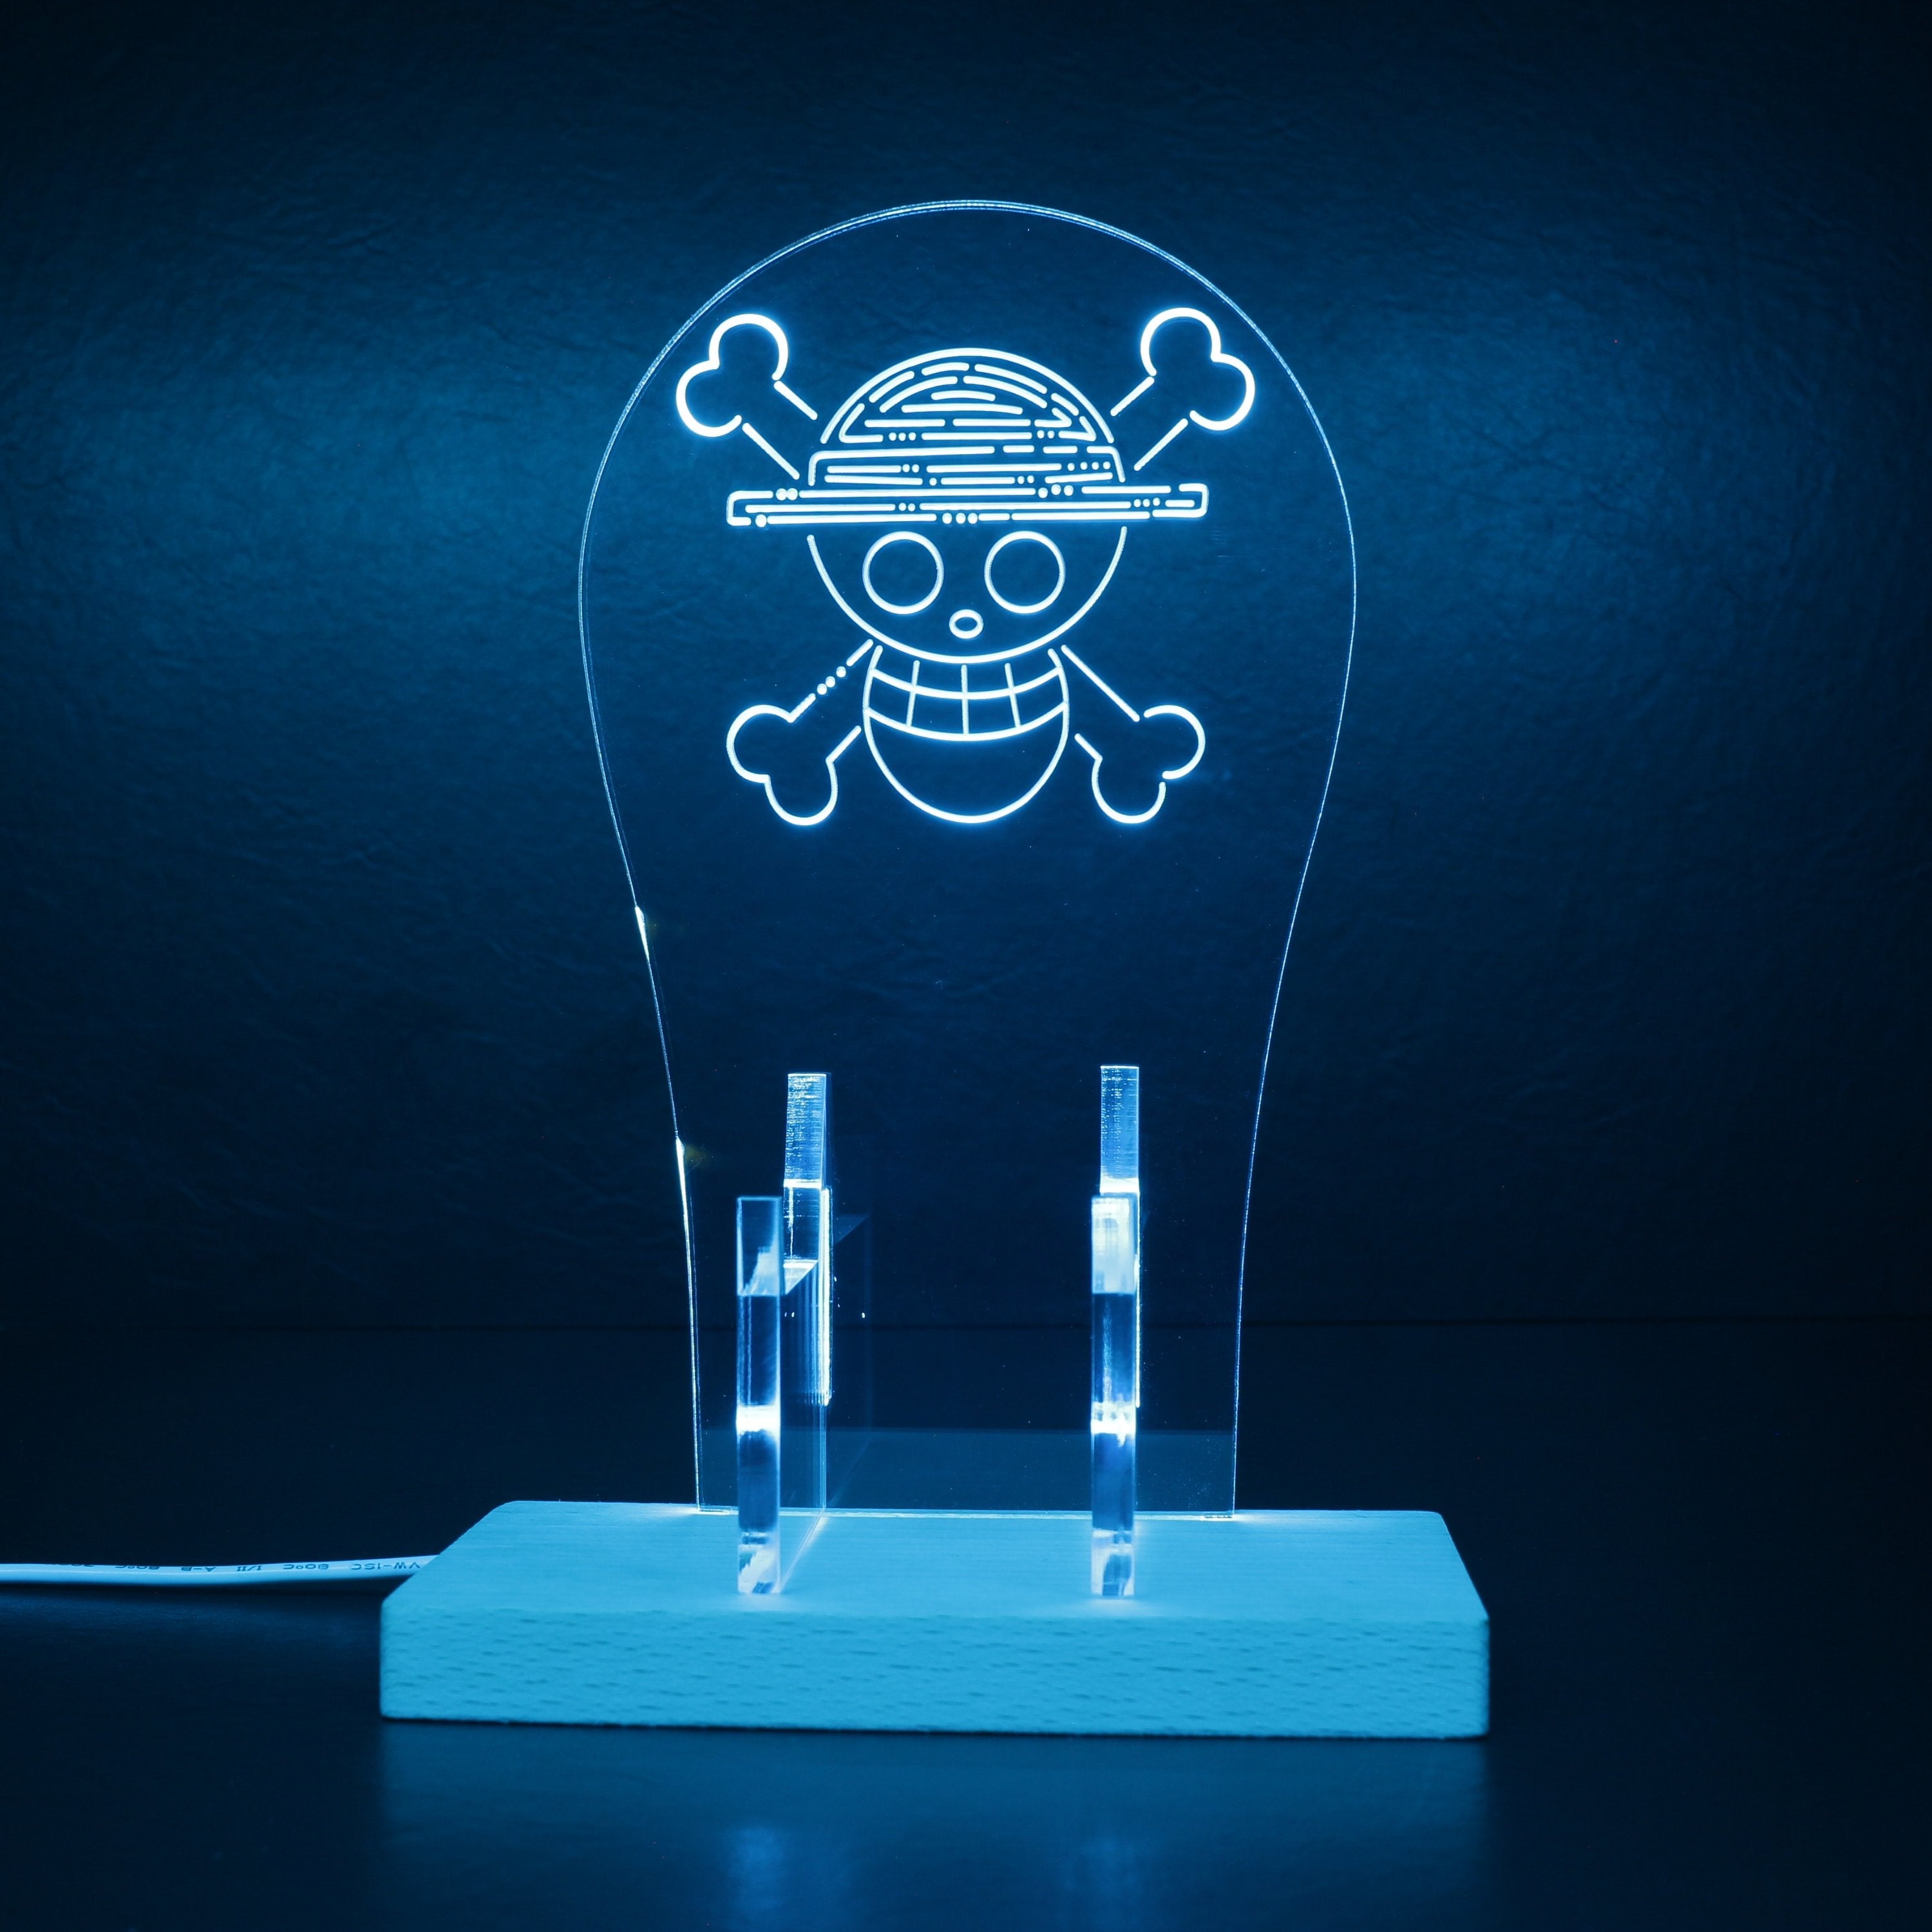 One Piece Skull LED Gaming Headset Controller Stand